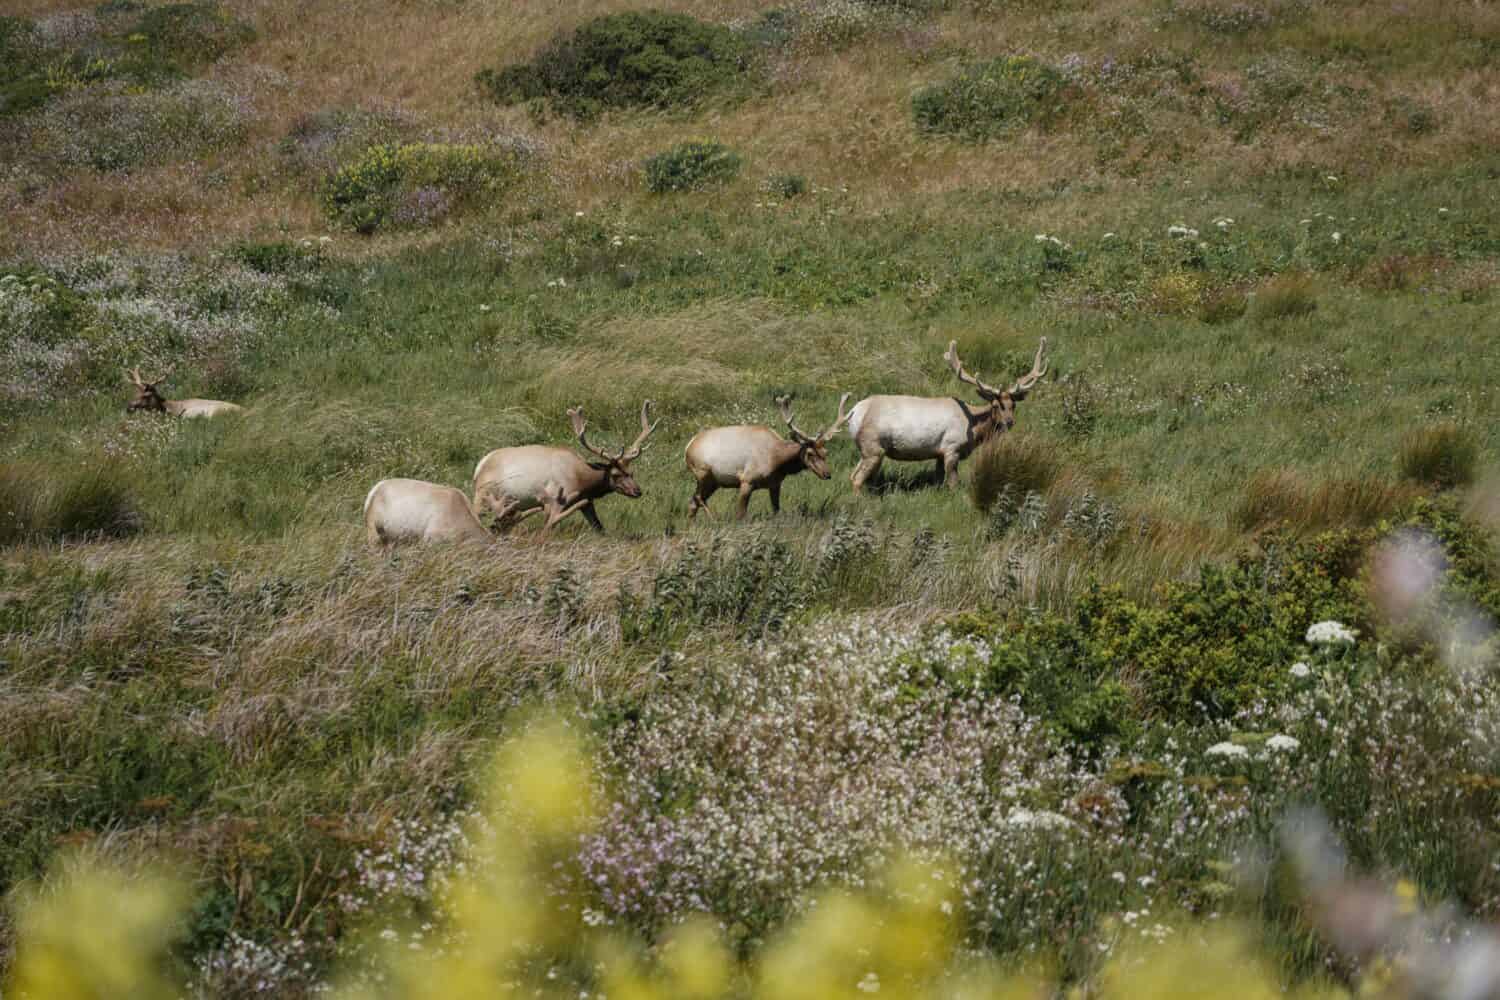 A large herd of Tule elks with beautiful antlers grazing on the grasslands with wild flowers as the foreground, shot on the Tomales Point Trail in late May in northern California. 